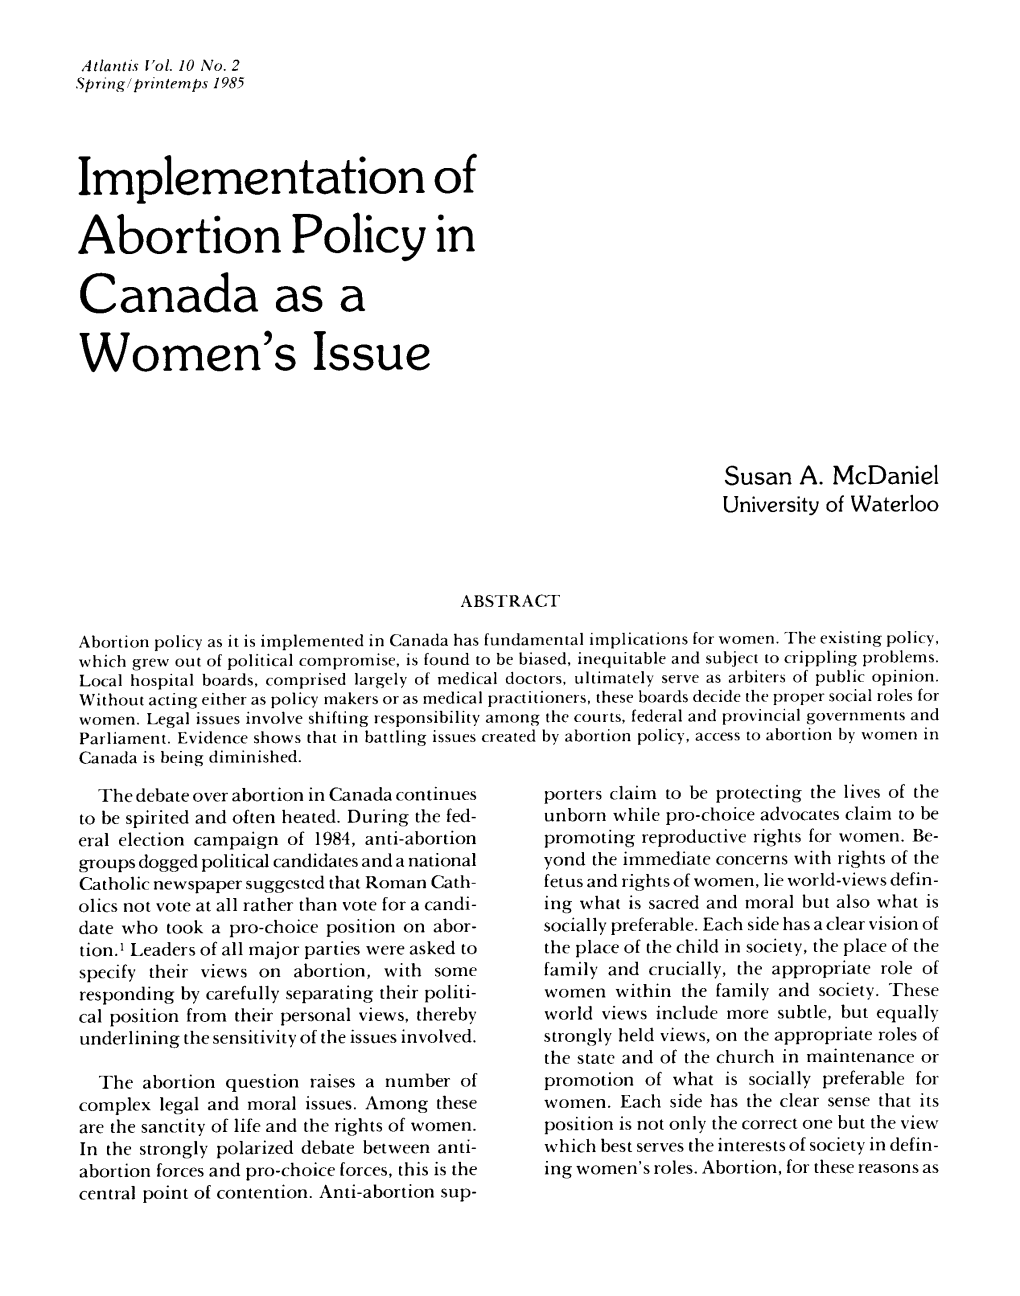 Implementation of Abortion Policy in Canada As a Women's Issue